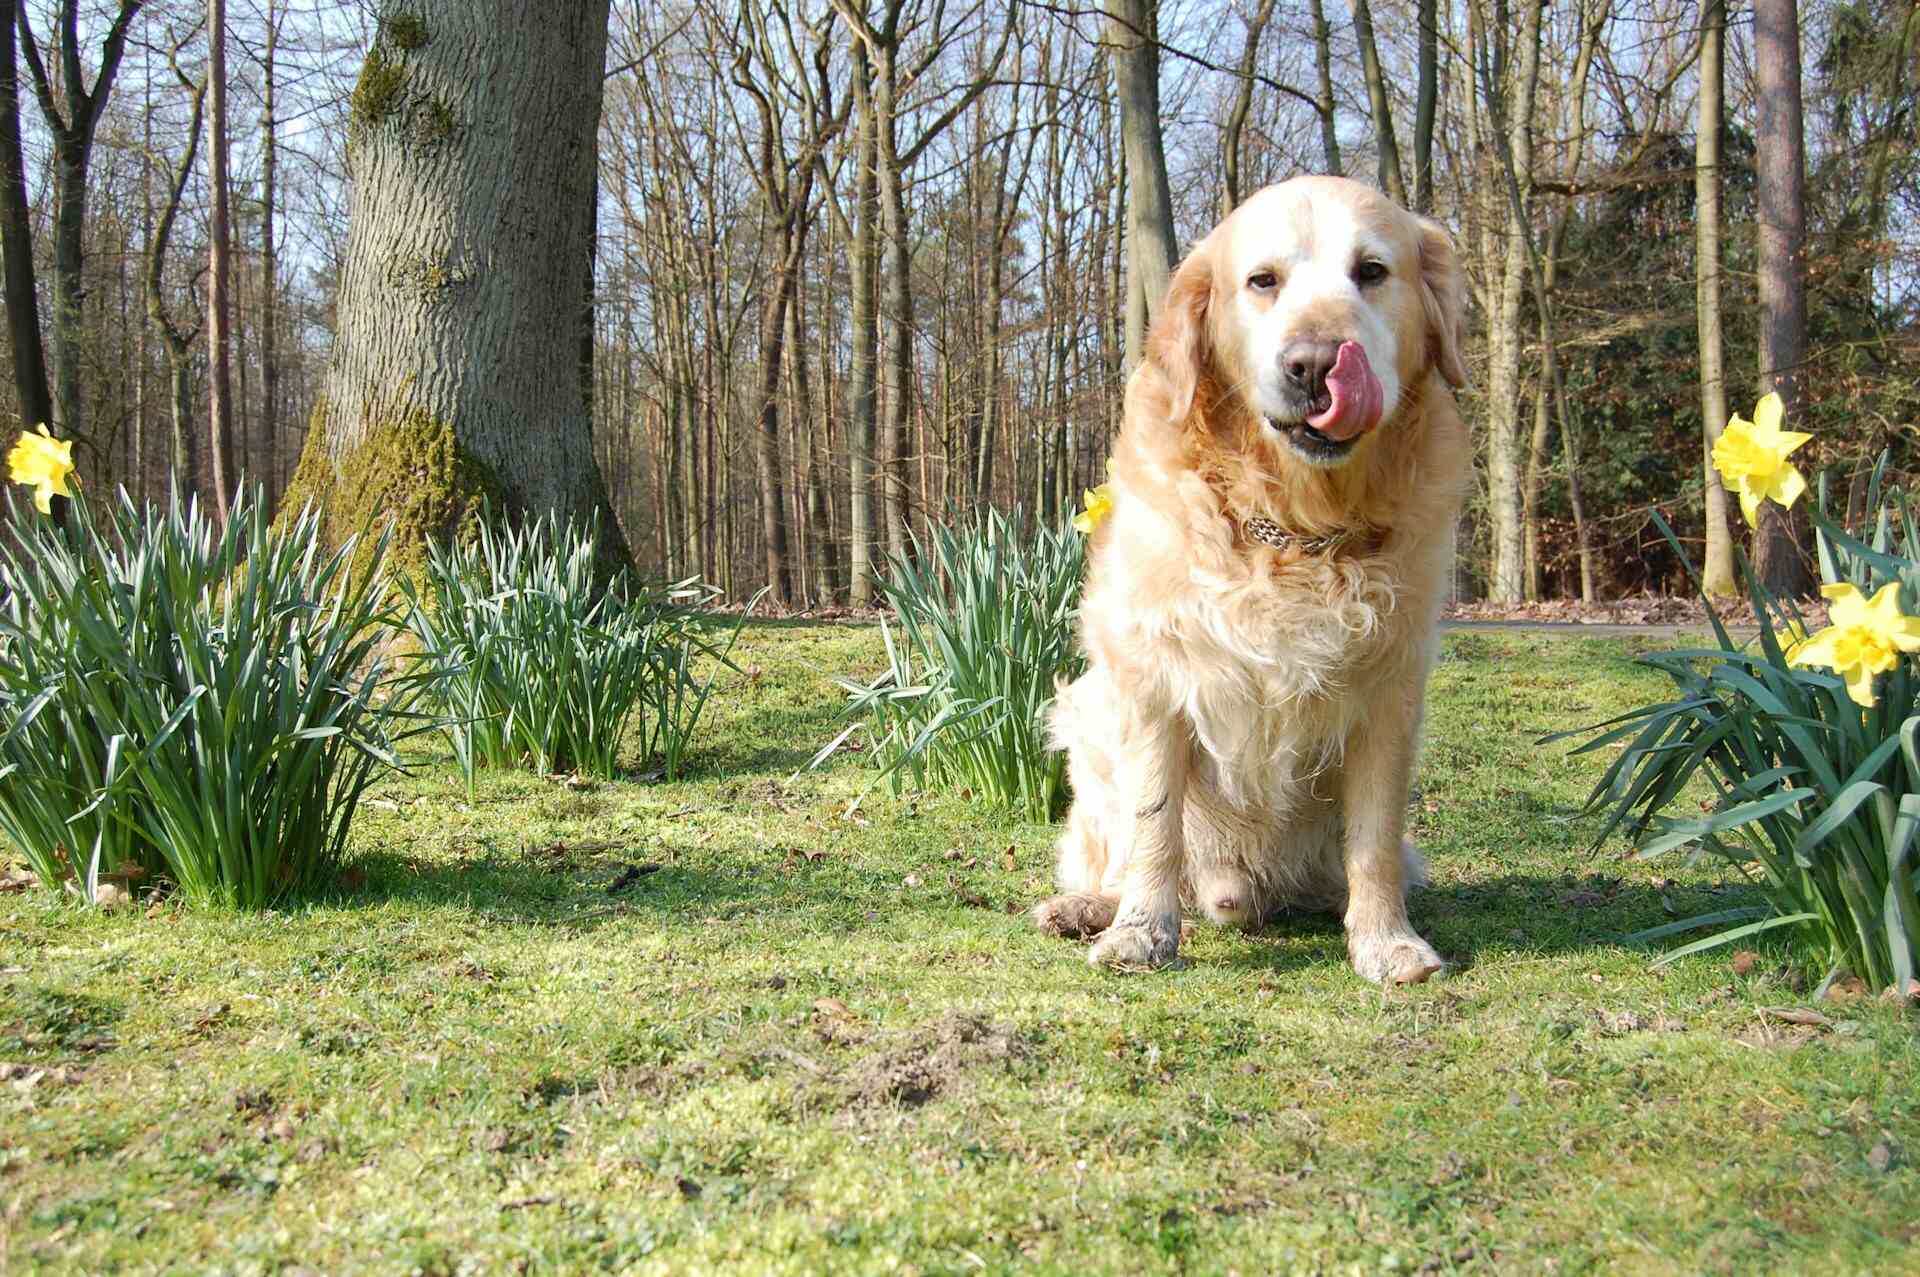 A Golden Retriever sitting outdoors in a sunny lawn